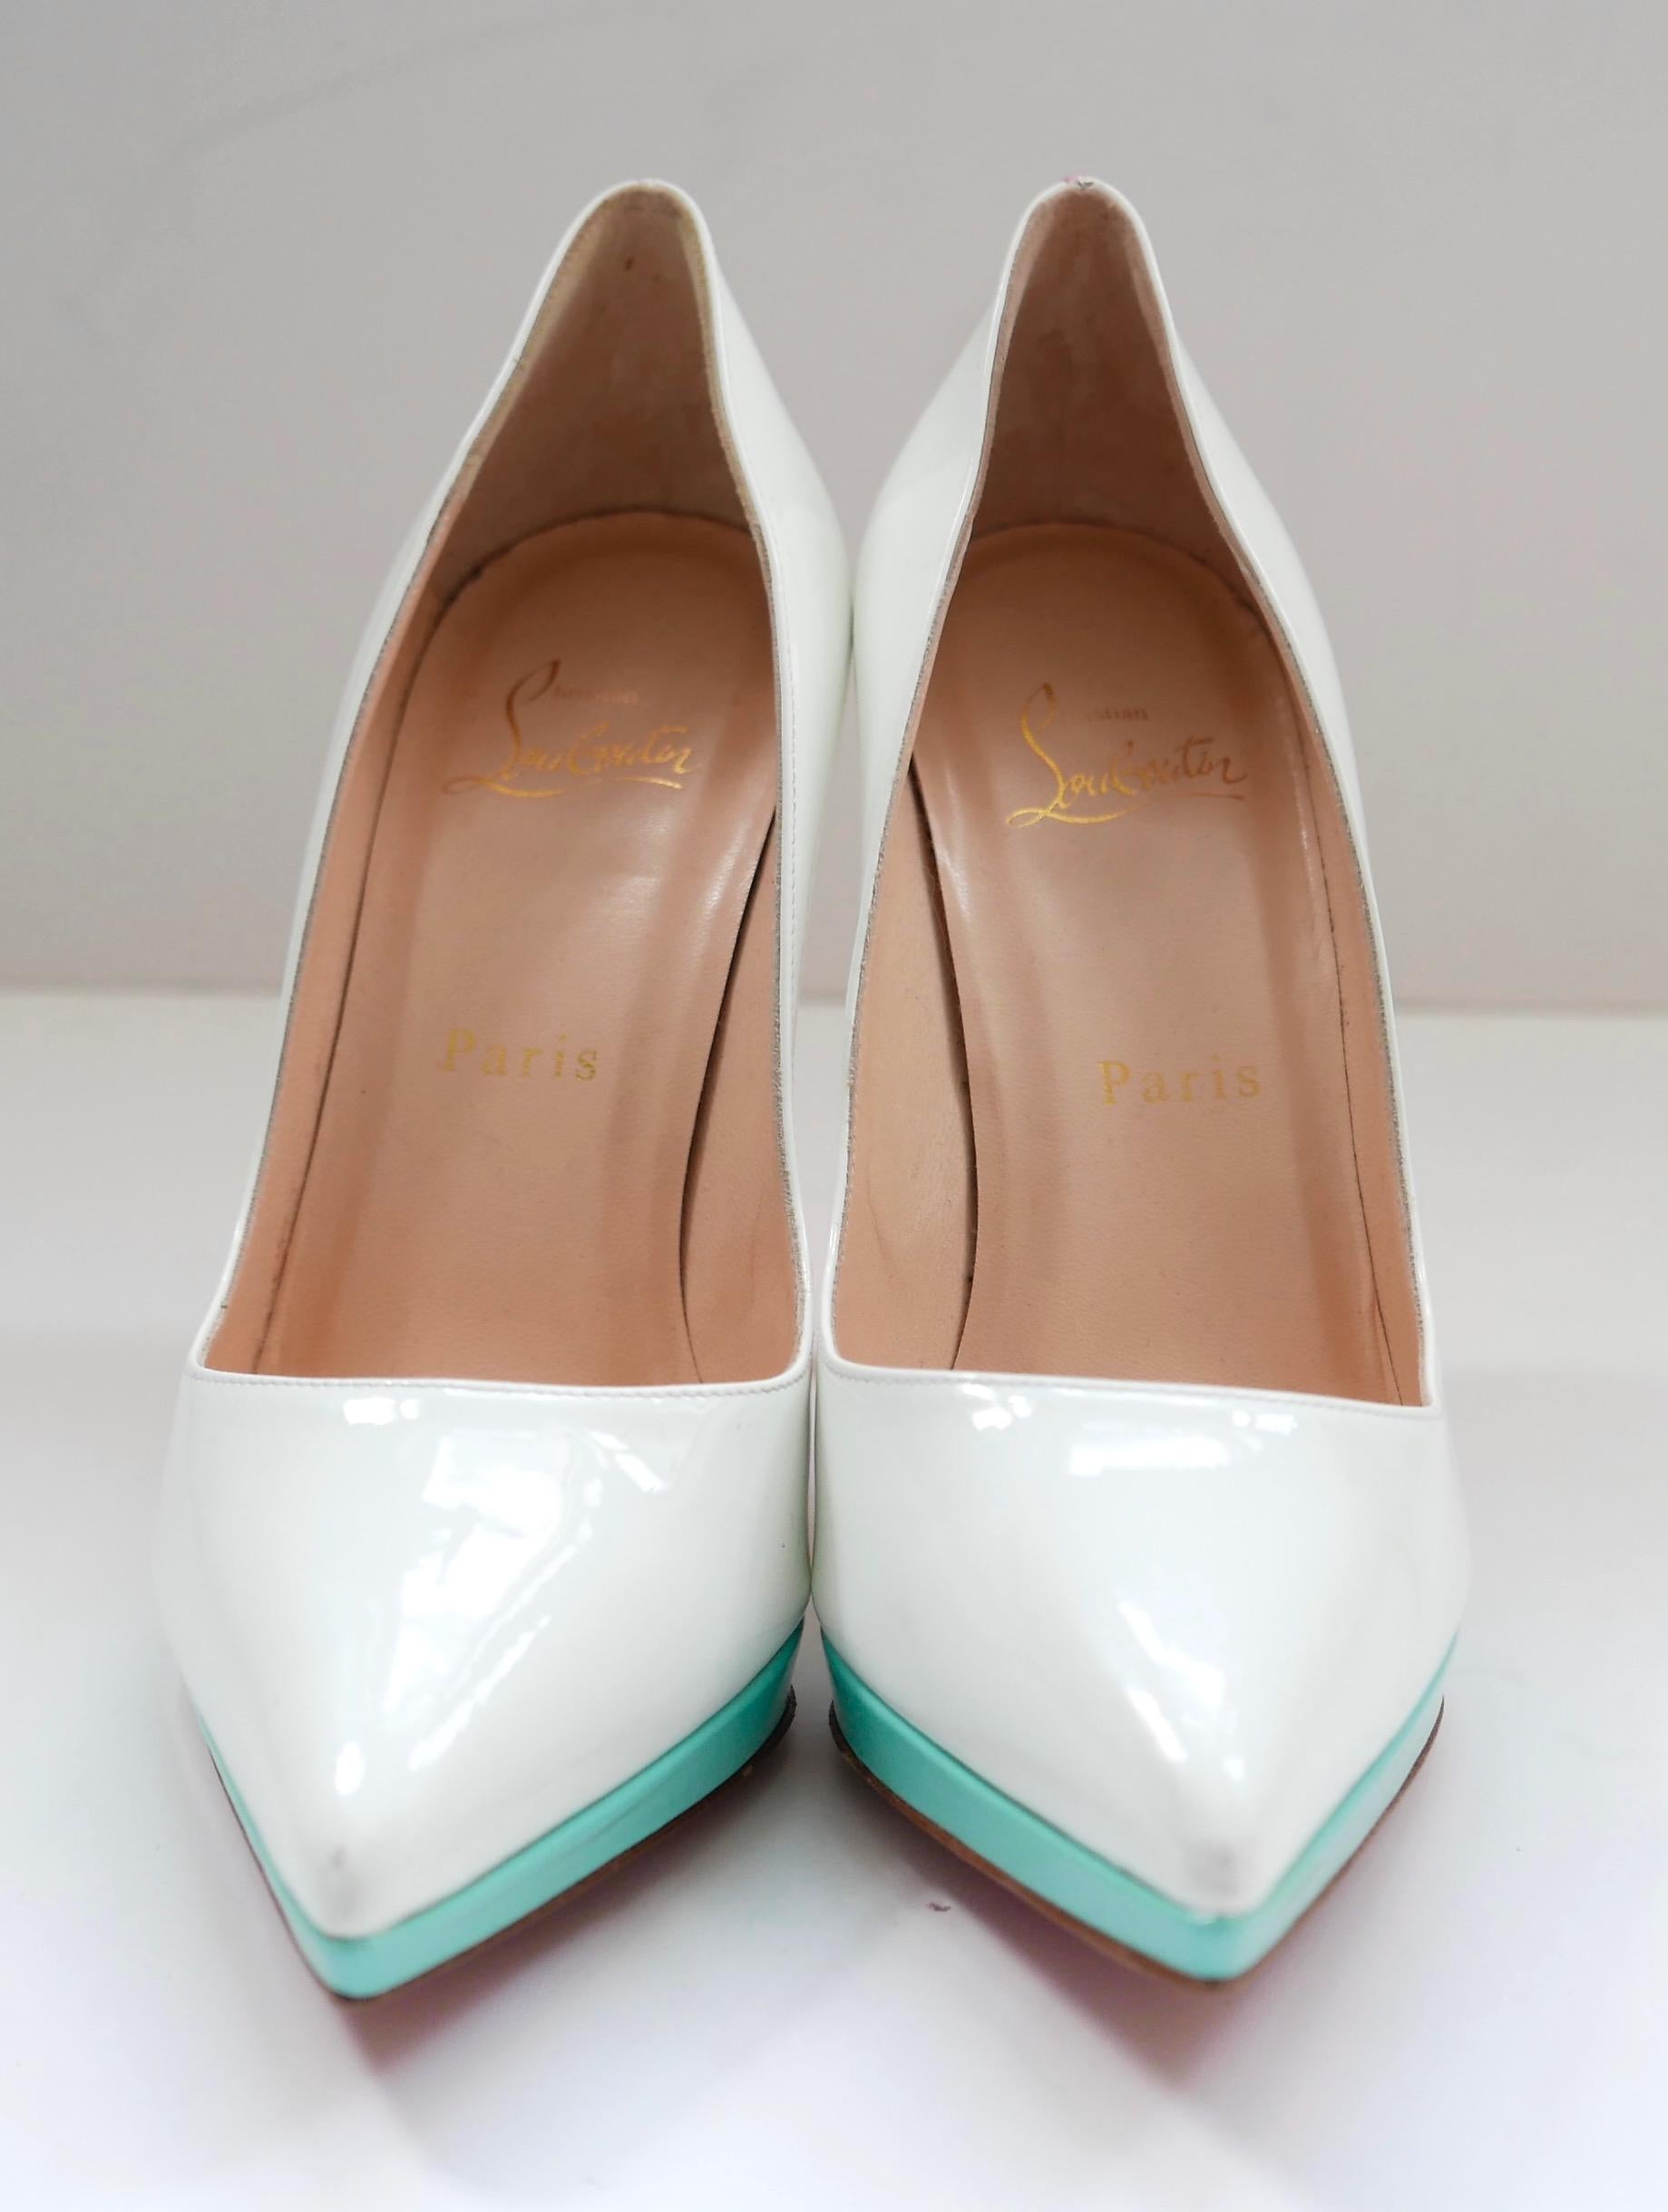 Christian Louboutin Pigalle Plato heels In Good Condition For Sale In London, GB